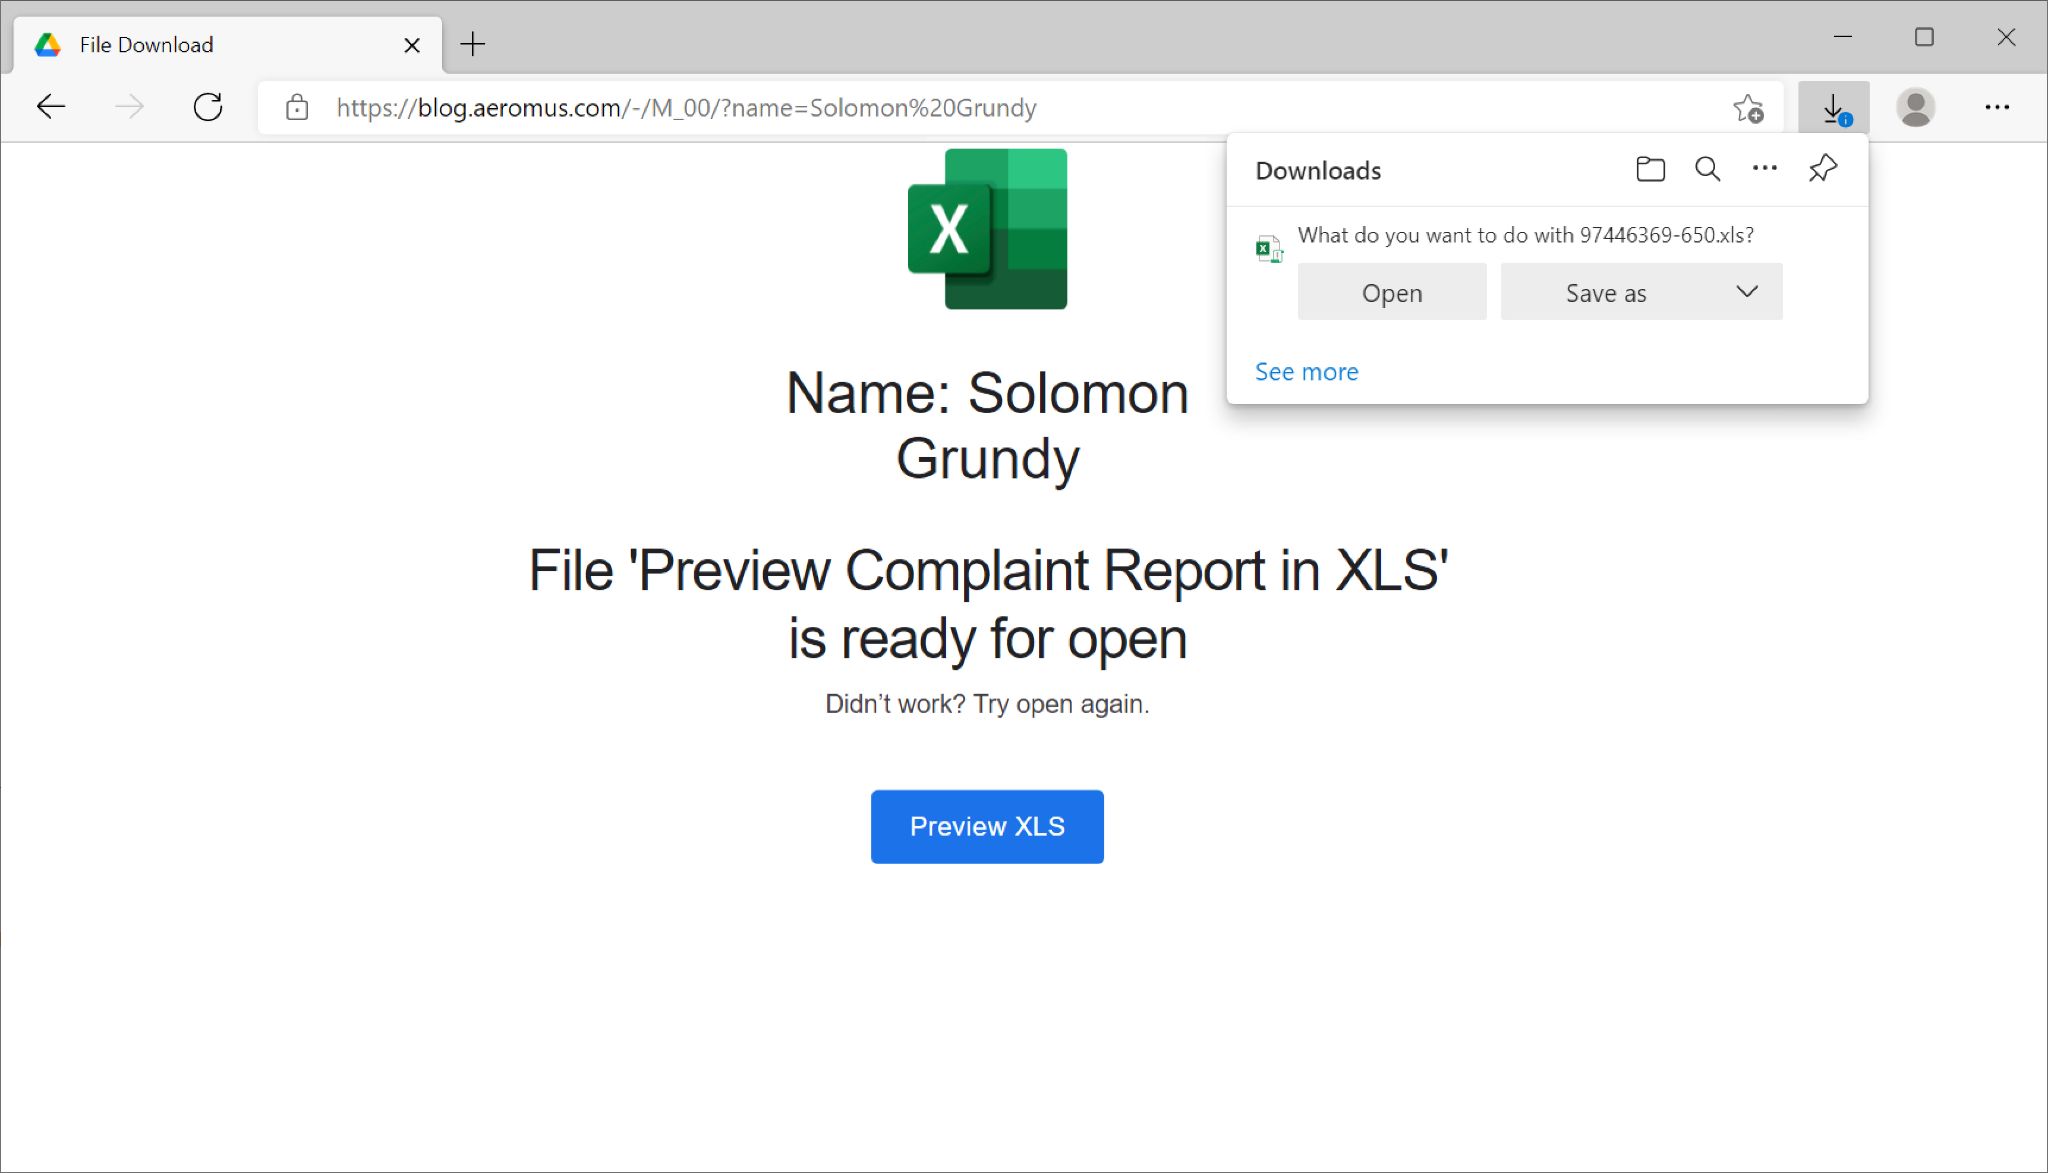 Fake complaint report page attempts to deliver a malicious Excel spreadsheet as shown. The screenshot reads, "File 'Preview Complaint Report in XLS' is ready for open." 